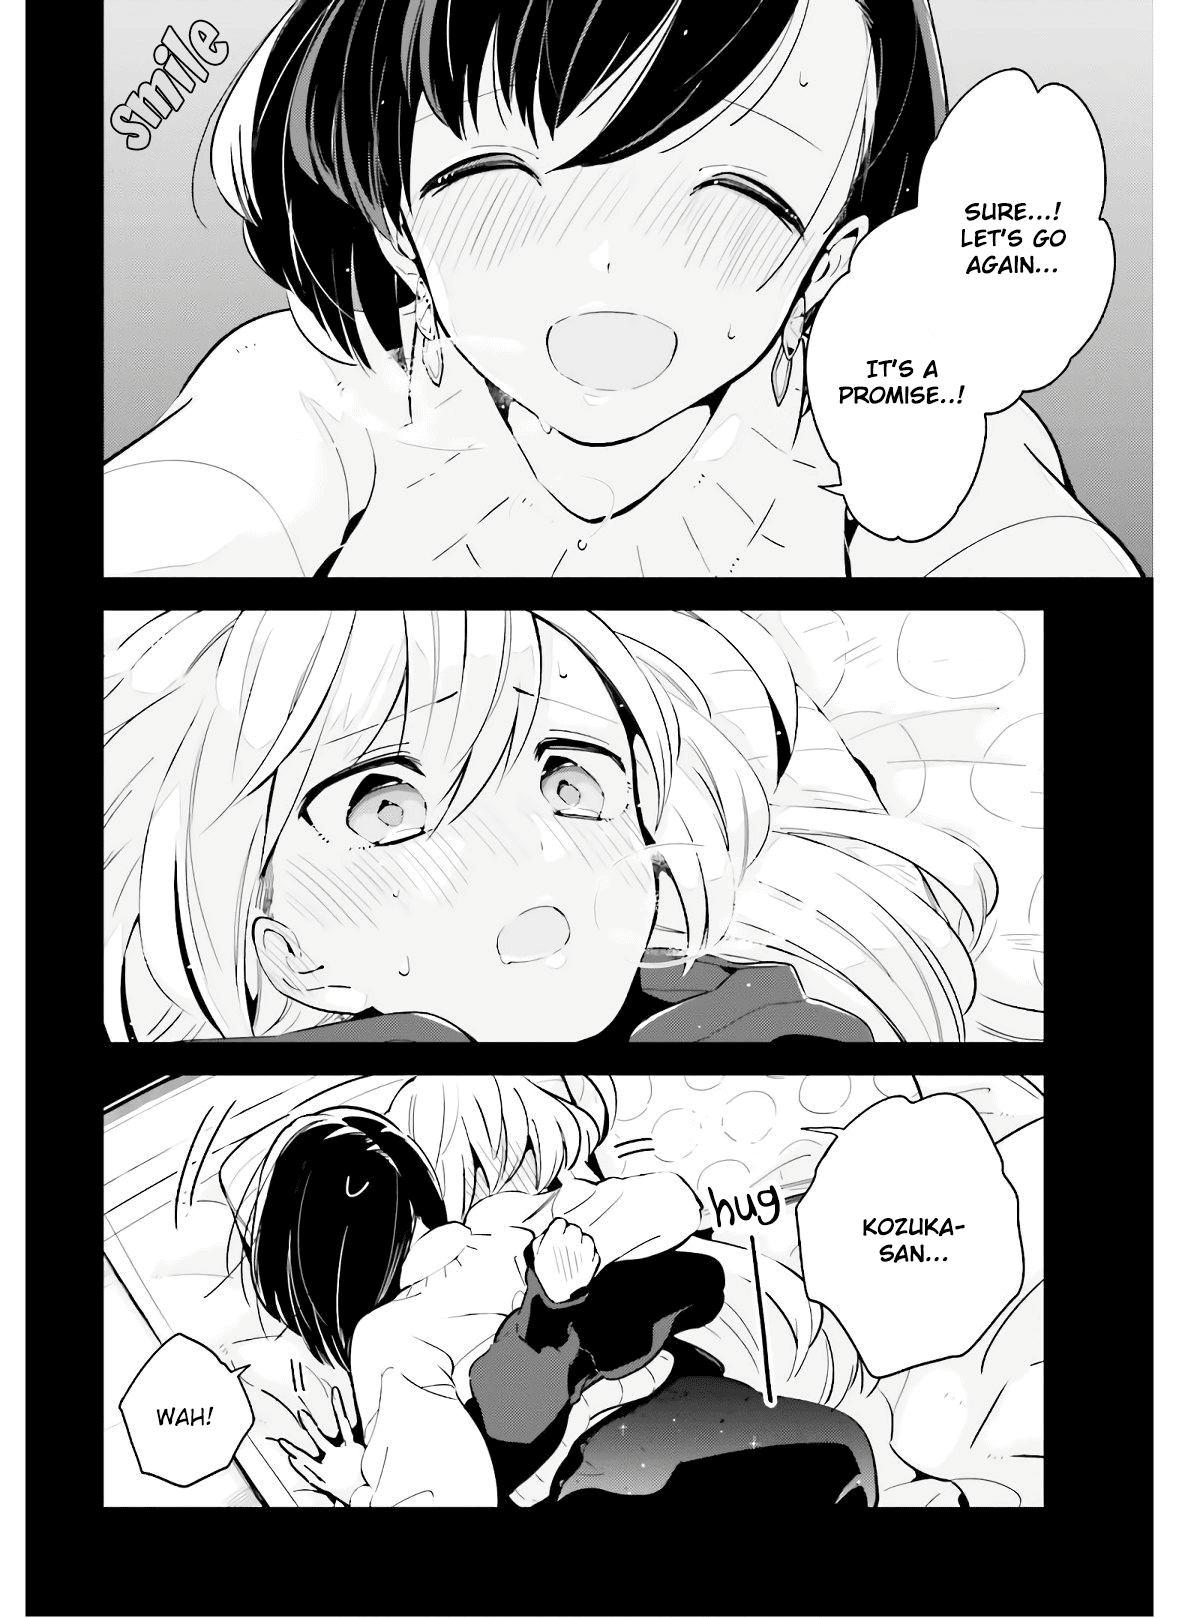 Even If It Was Just Once, I Regret It - Page 2